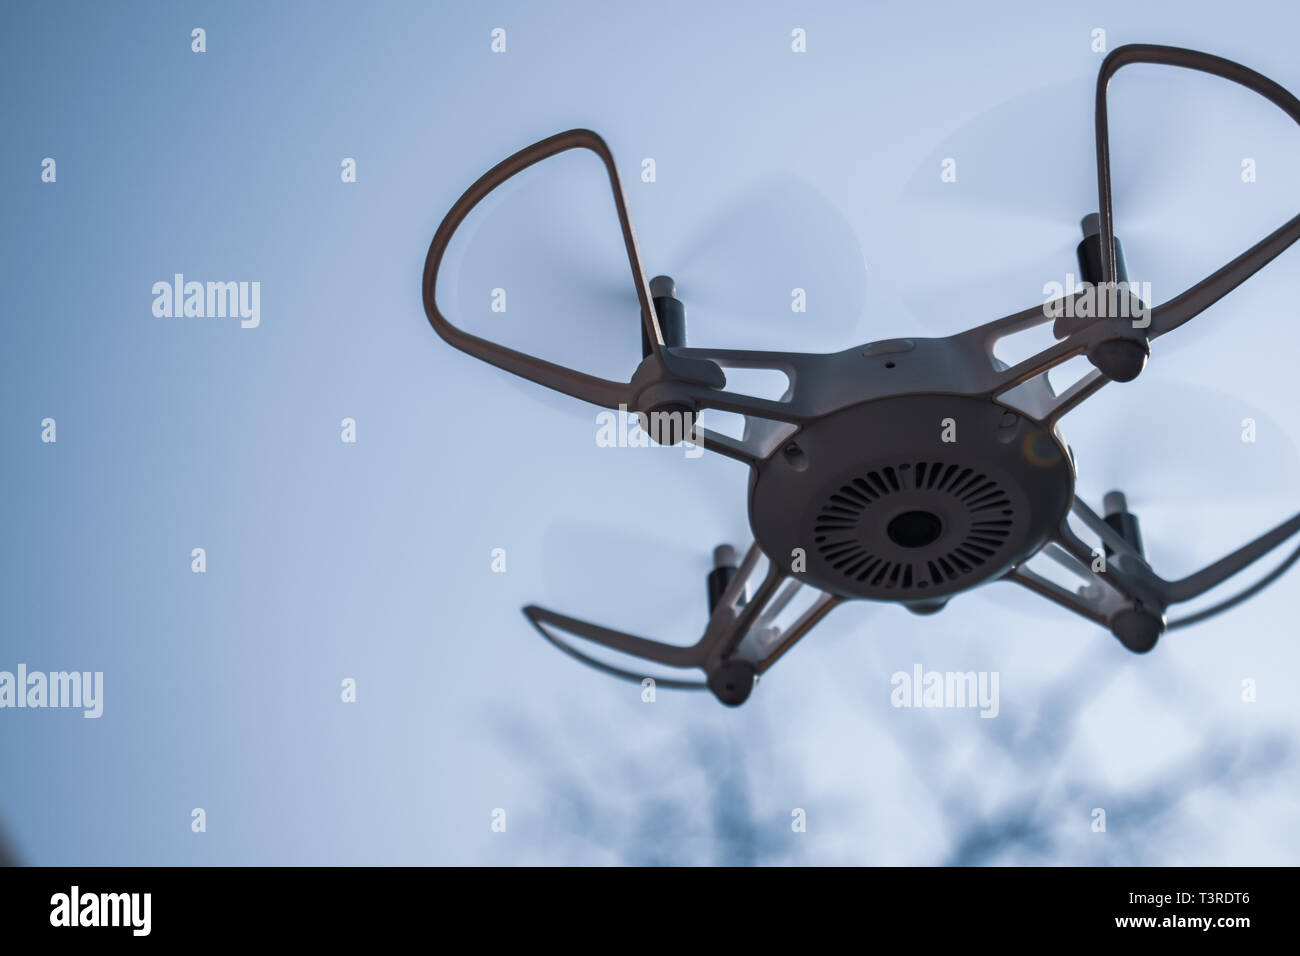 Quadcopter drone hovering in a blue sky Stock Photo